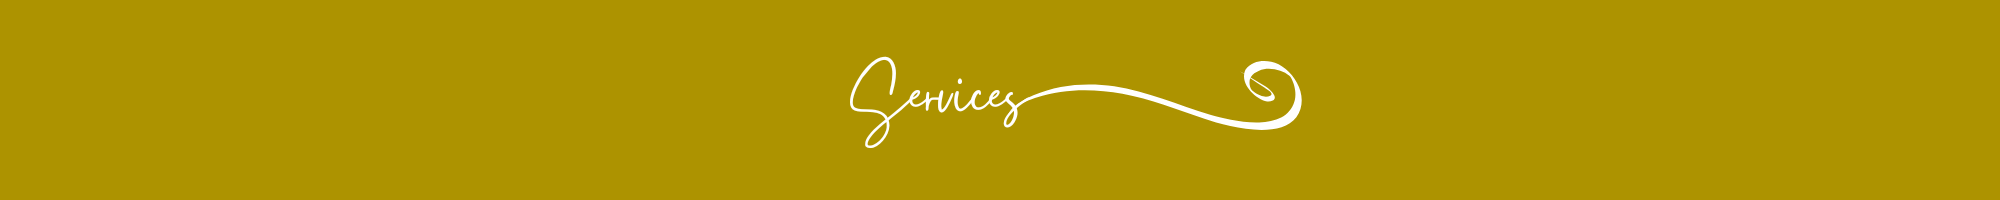 Header Image with gold background and the words Services in white lettering